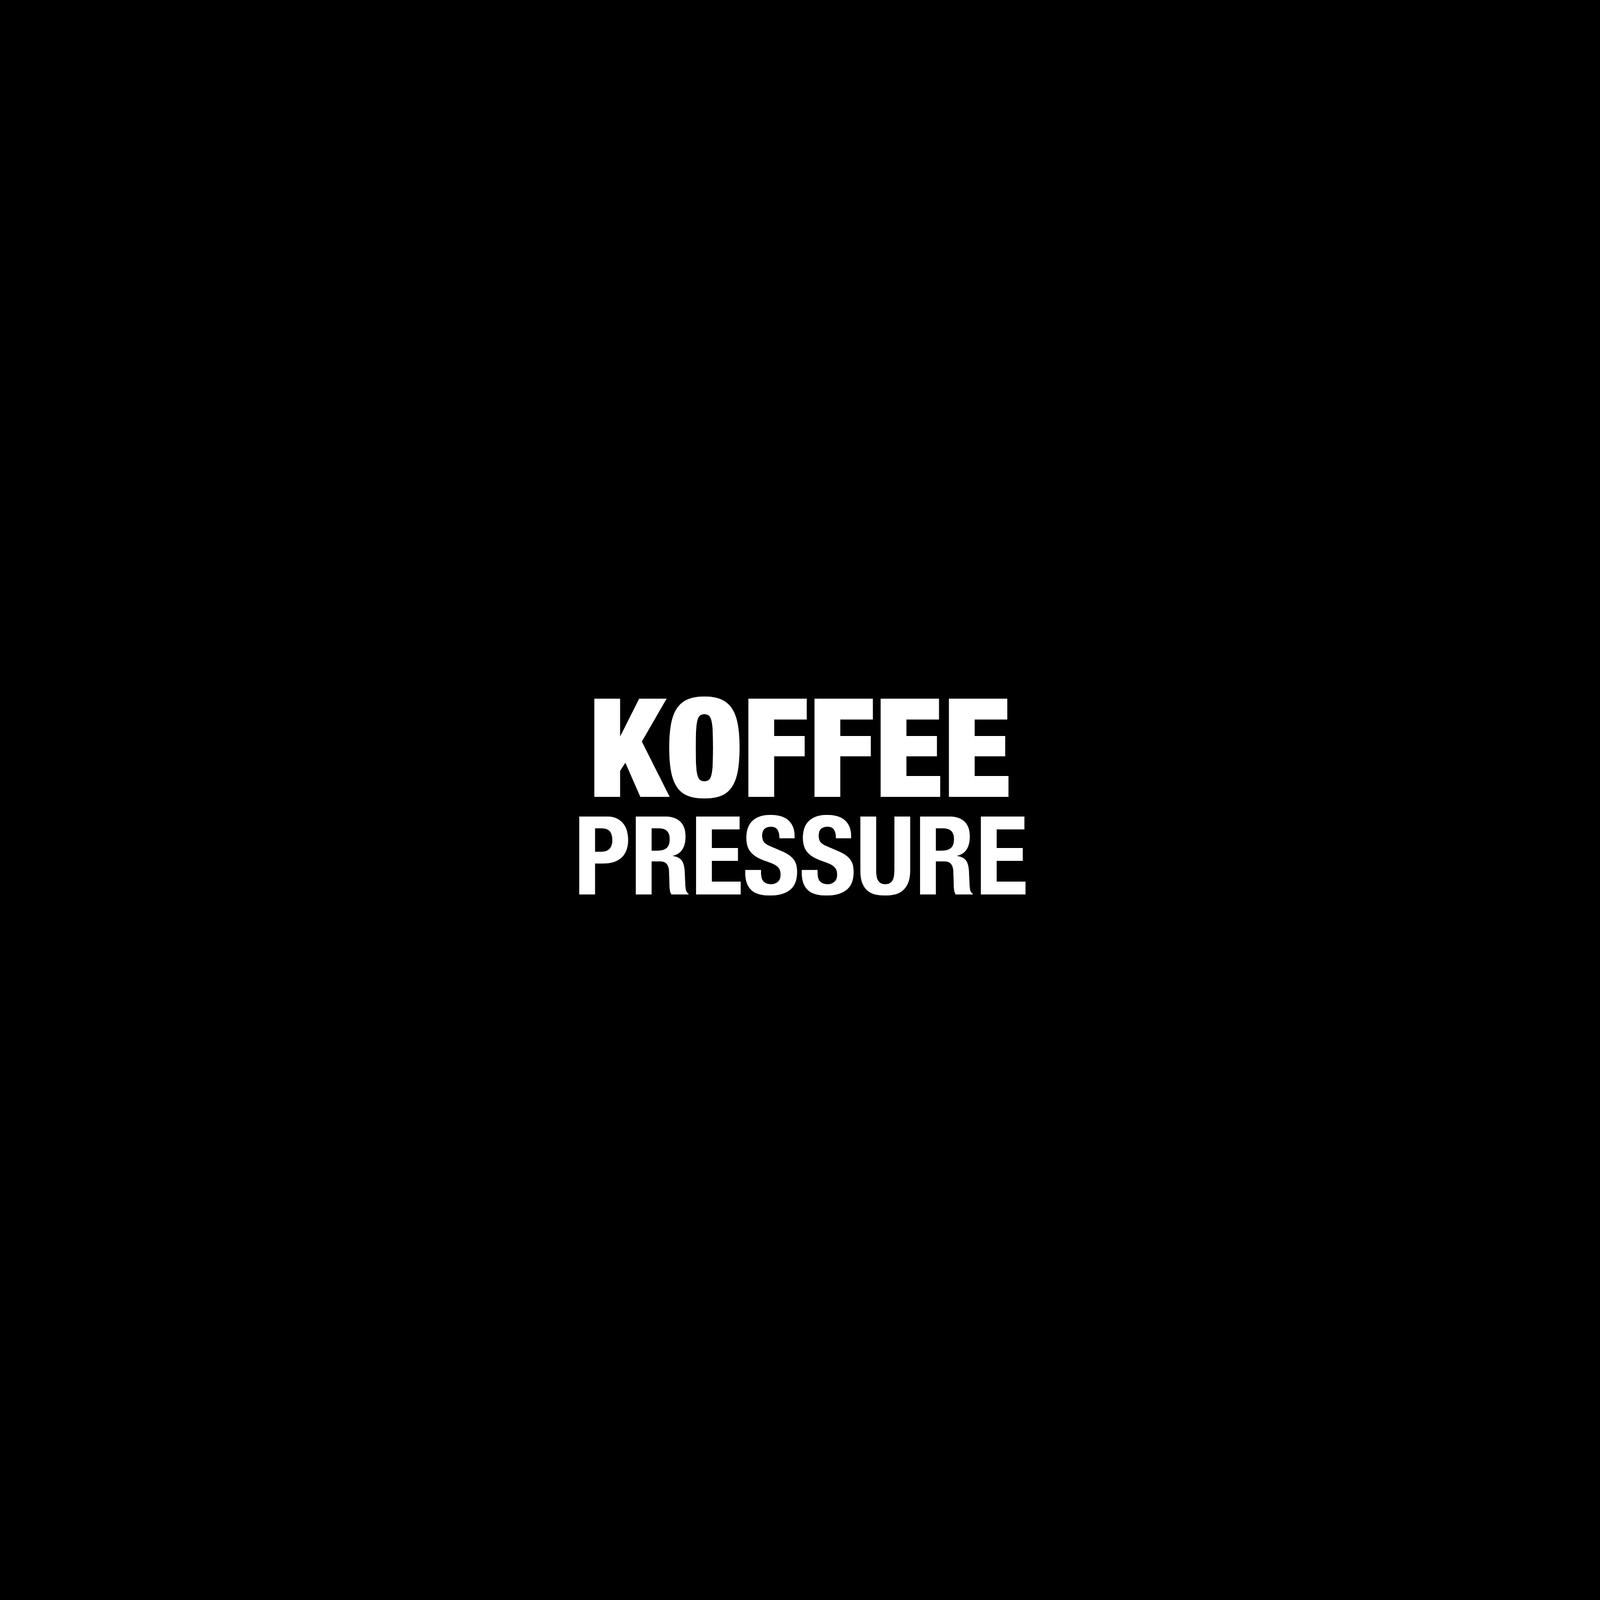 Art for Pressure (Clean) by Koffee